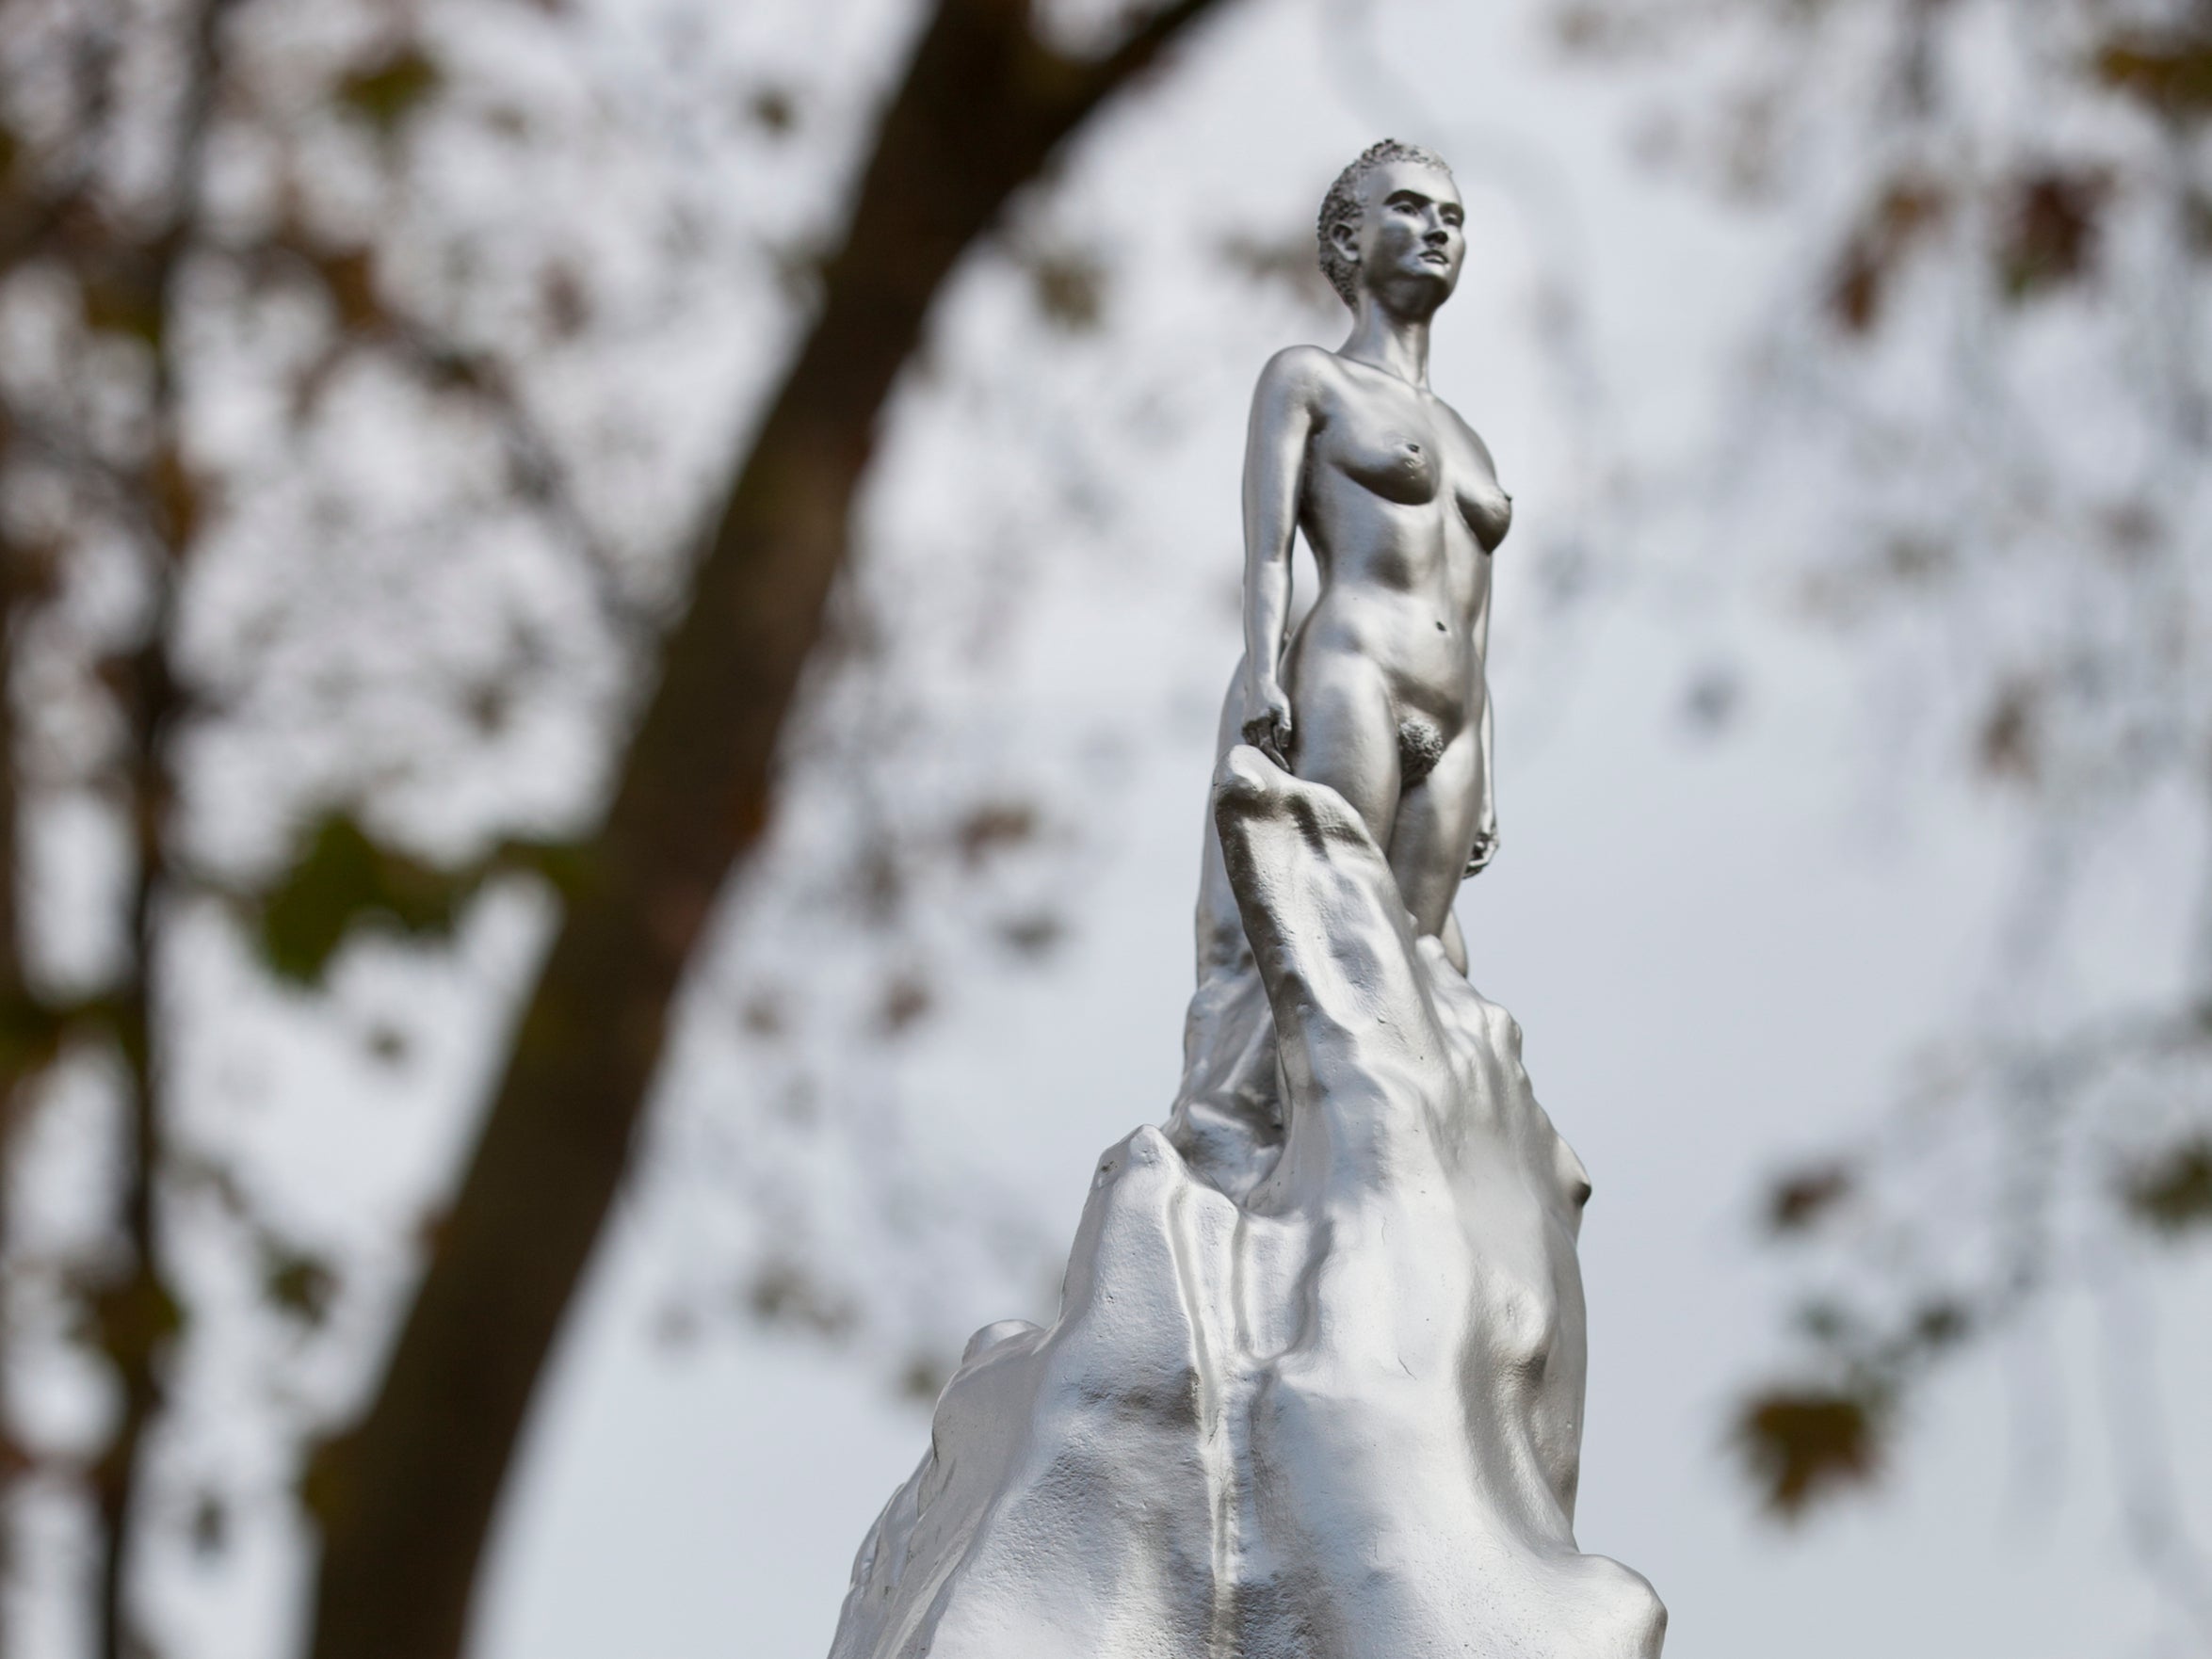 Maggi Hambling's 'A Sculpture for Mary Wollstonecraft' in Newington Green, north London